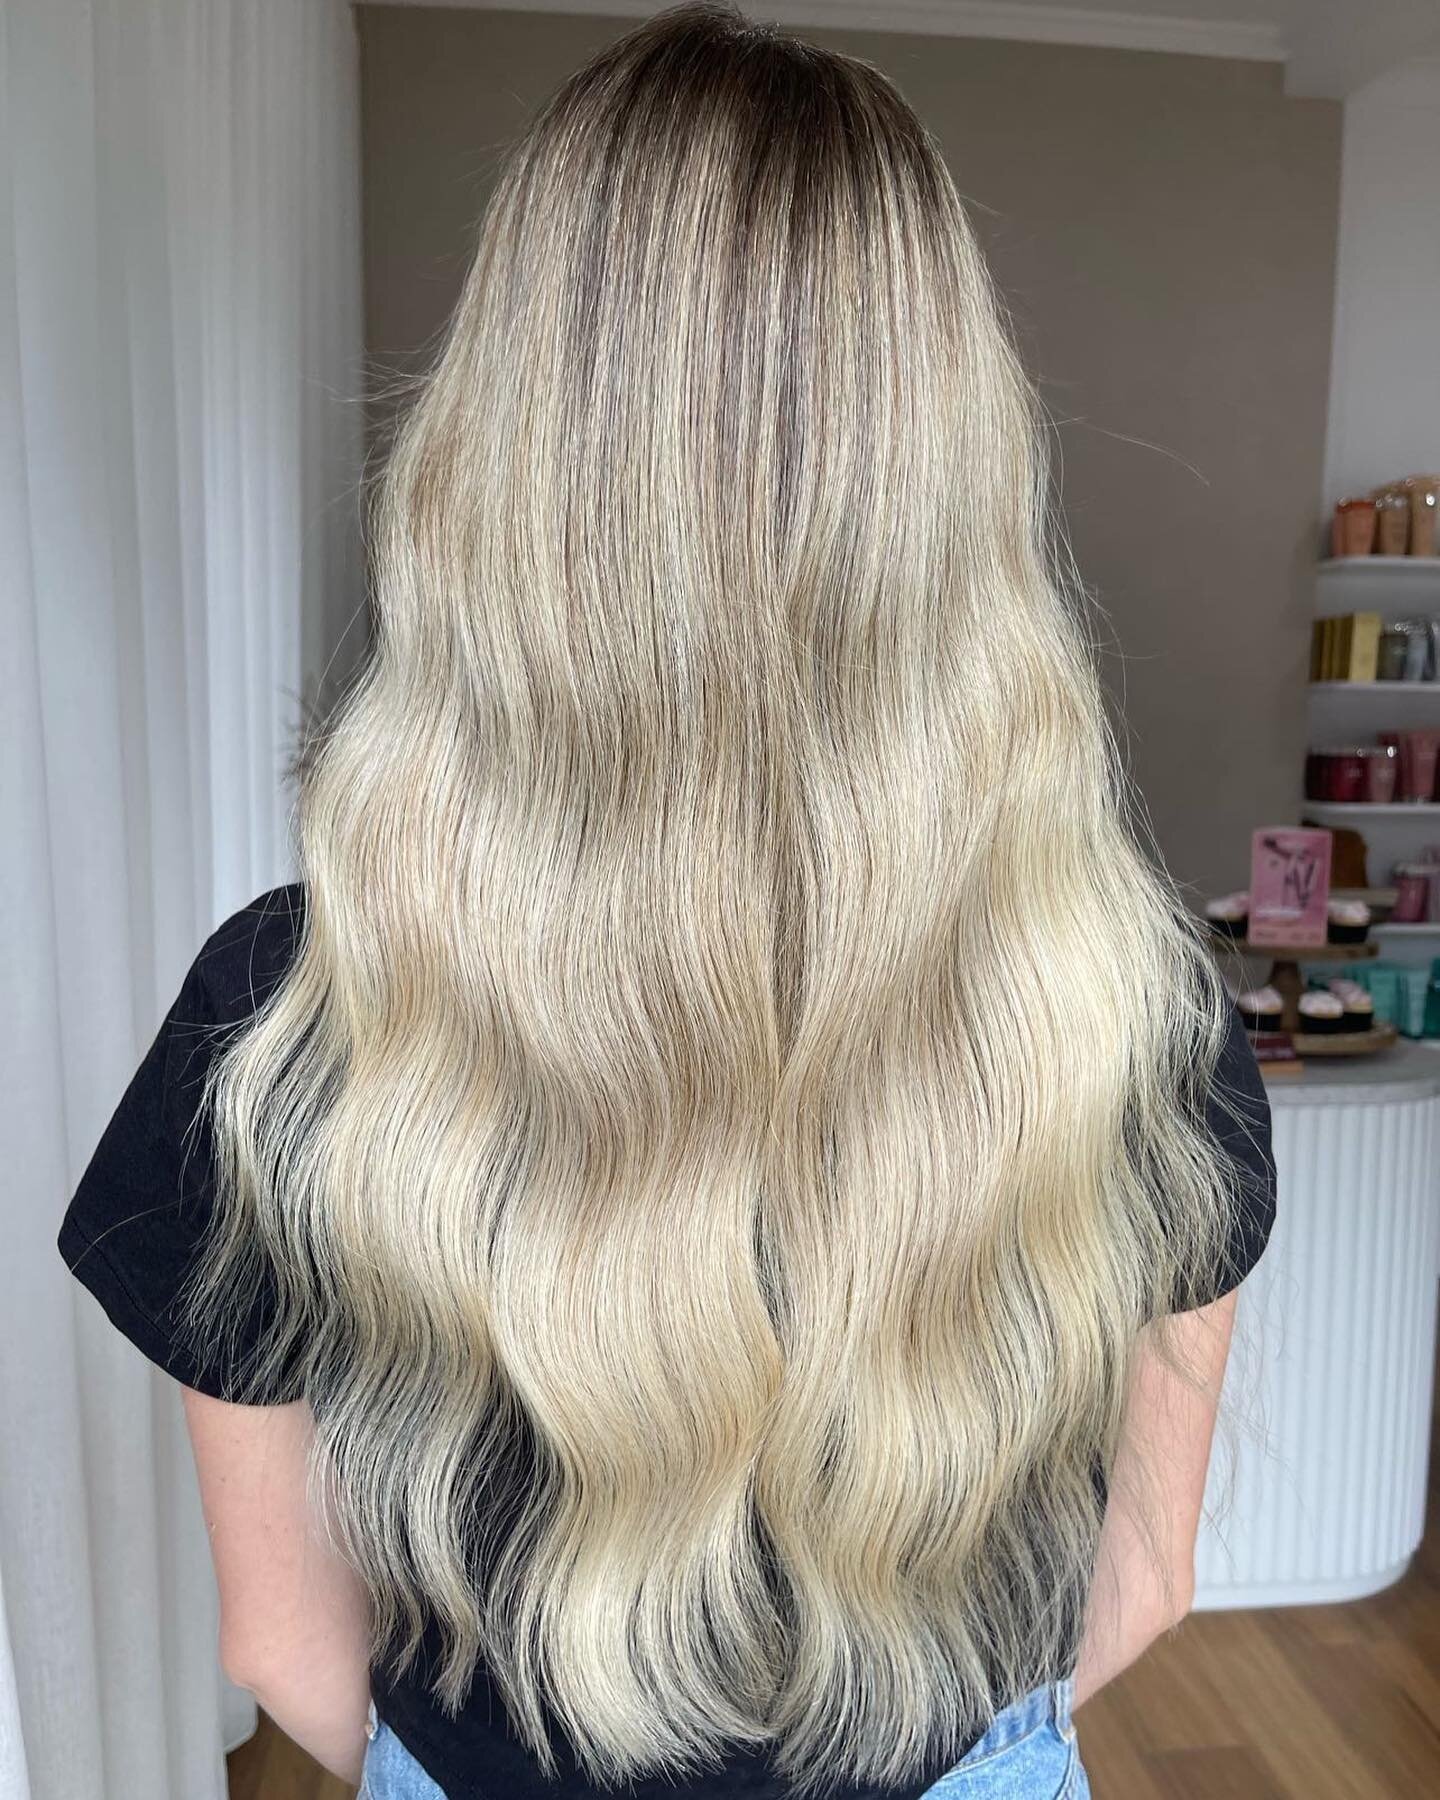 𝙂𝙡𝙤𝙬 𝙐𝙥 ✨ 

Hair services have evolved SO much over the years and a traditional &ldquo;full head of foils&rdquo; doesn&rsquo;t quite cut it anymore when you want to make a big impact. 
More techniques are required in order to achieve the Glow U